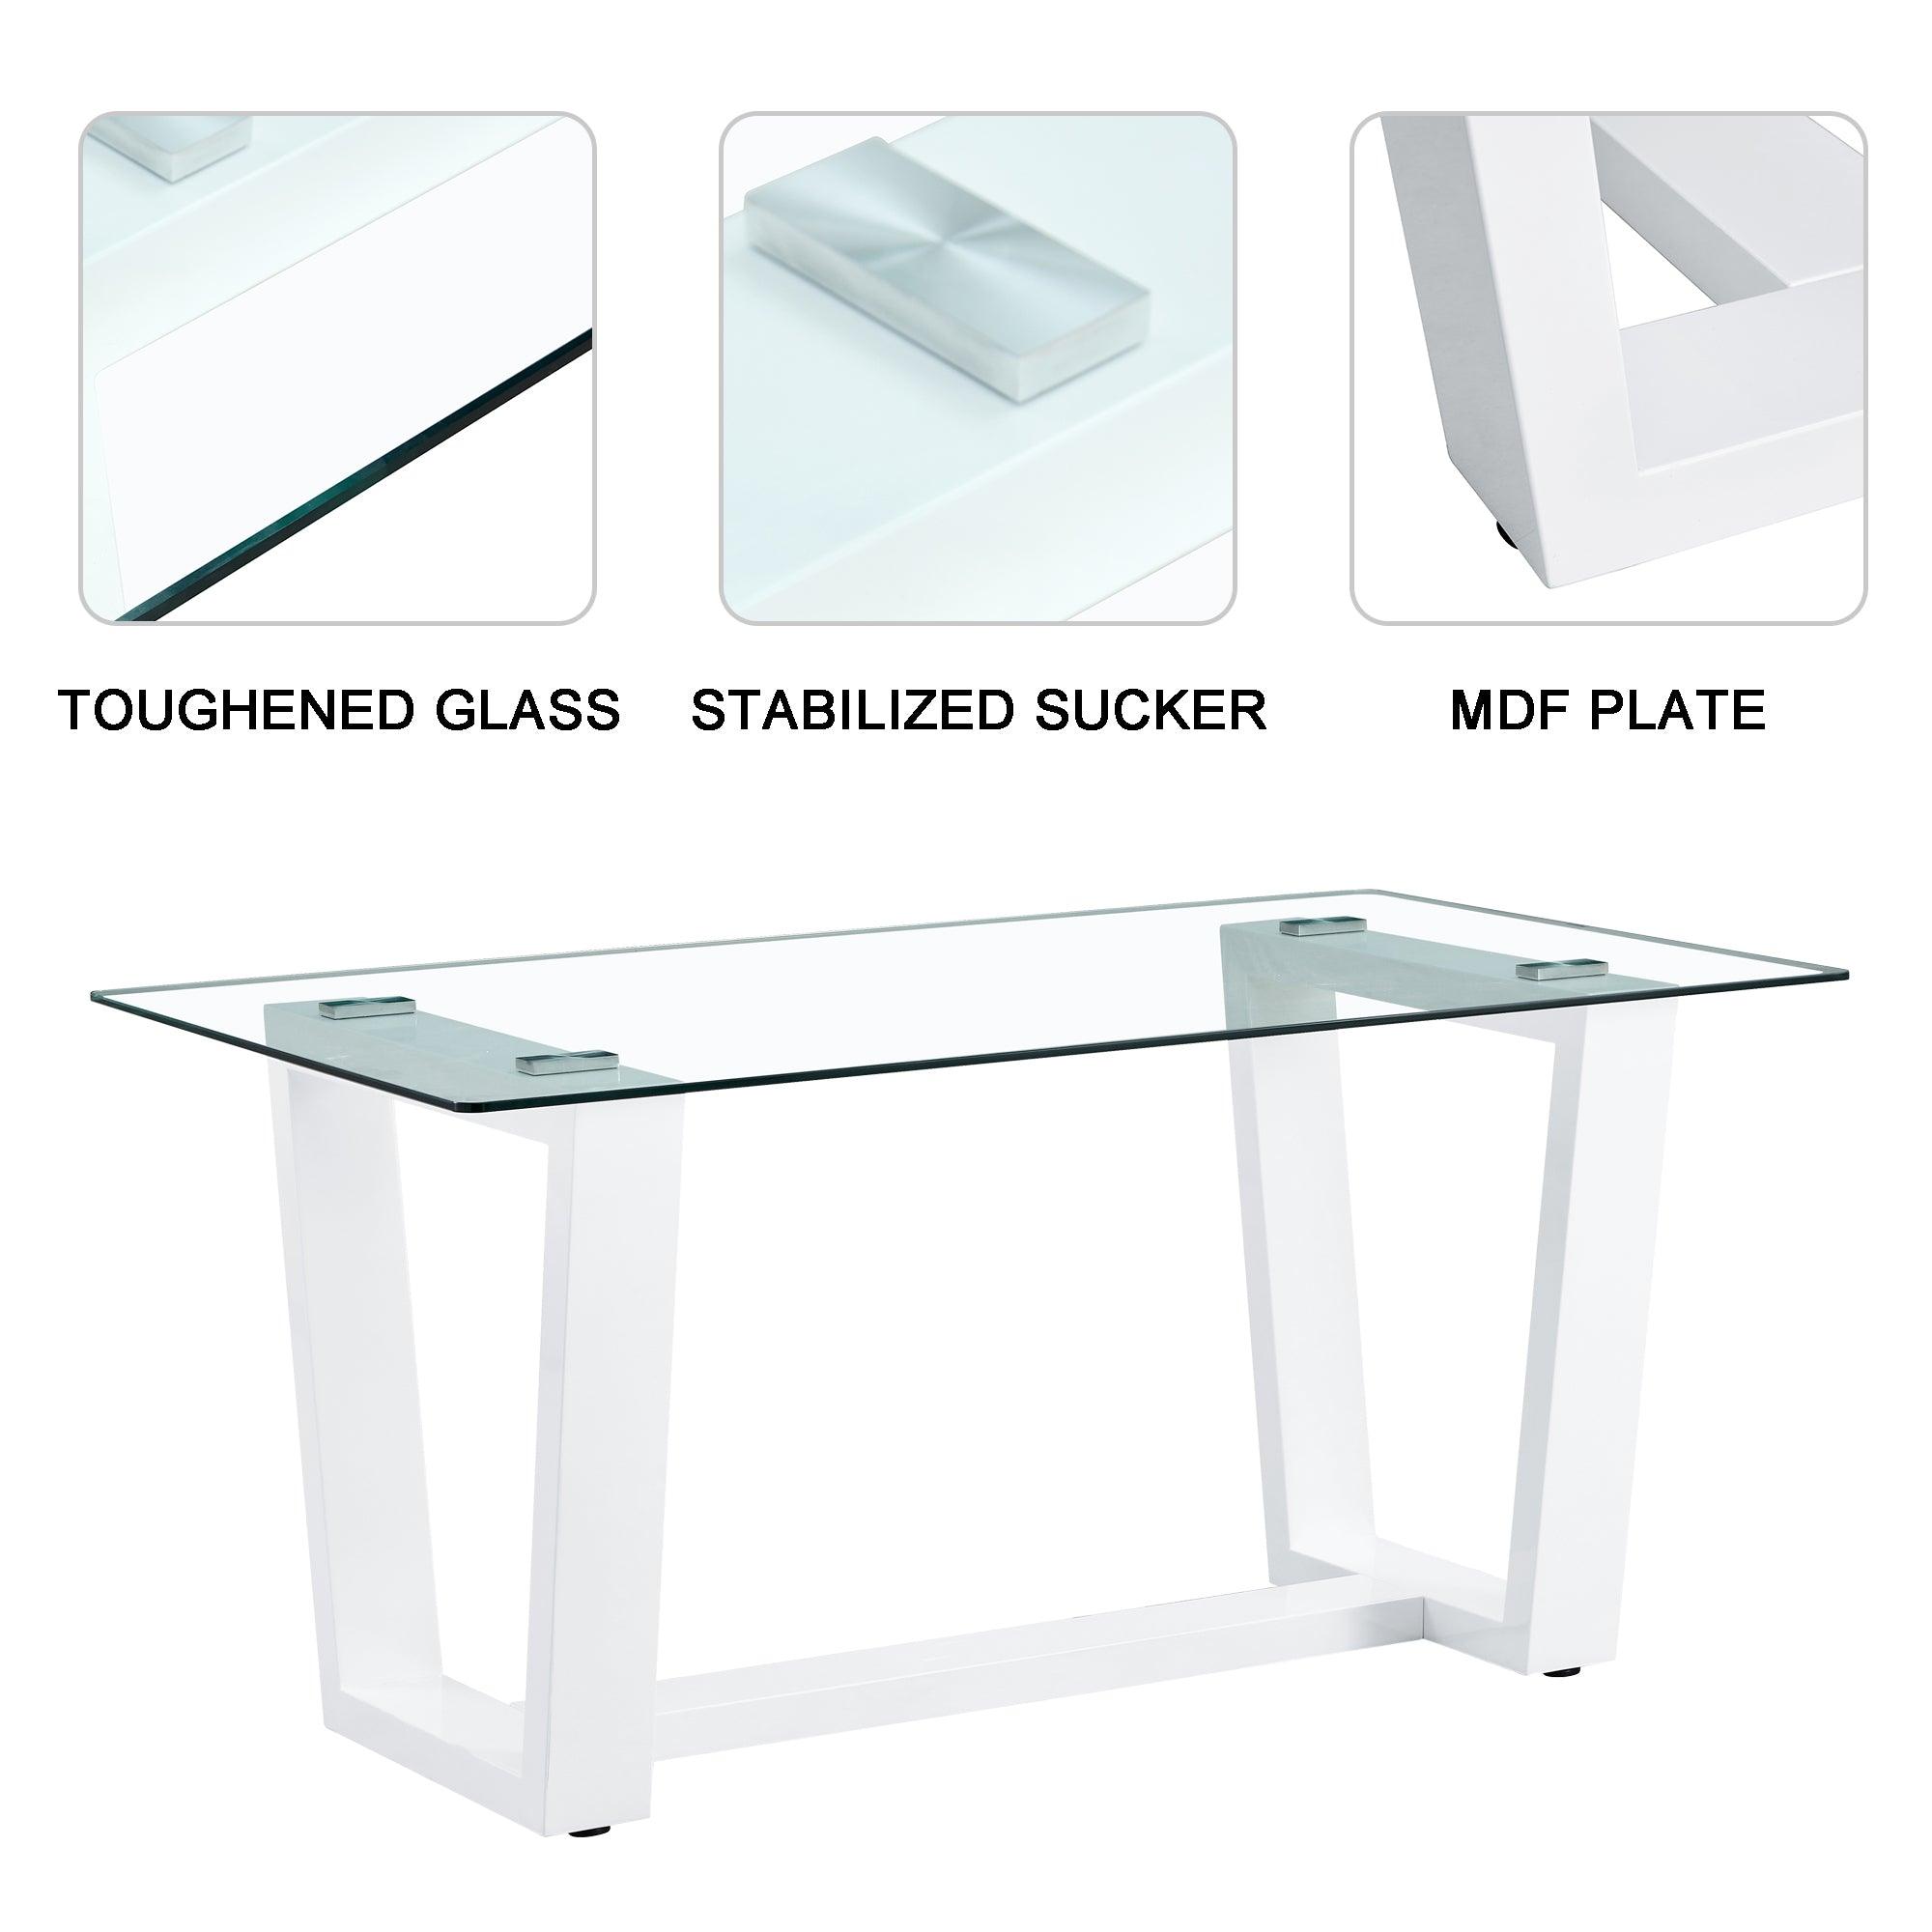 Glass Dining Table Large Modern Minimalist Rectangular for 6-8 with 0.4" Tempered Glass Tabletop and white MDF Trapezoid Bracket, For Kitchen Dining Living Meeting Room Banquet Hall